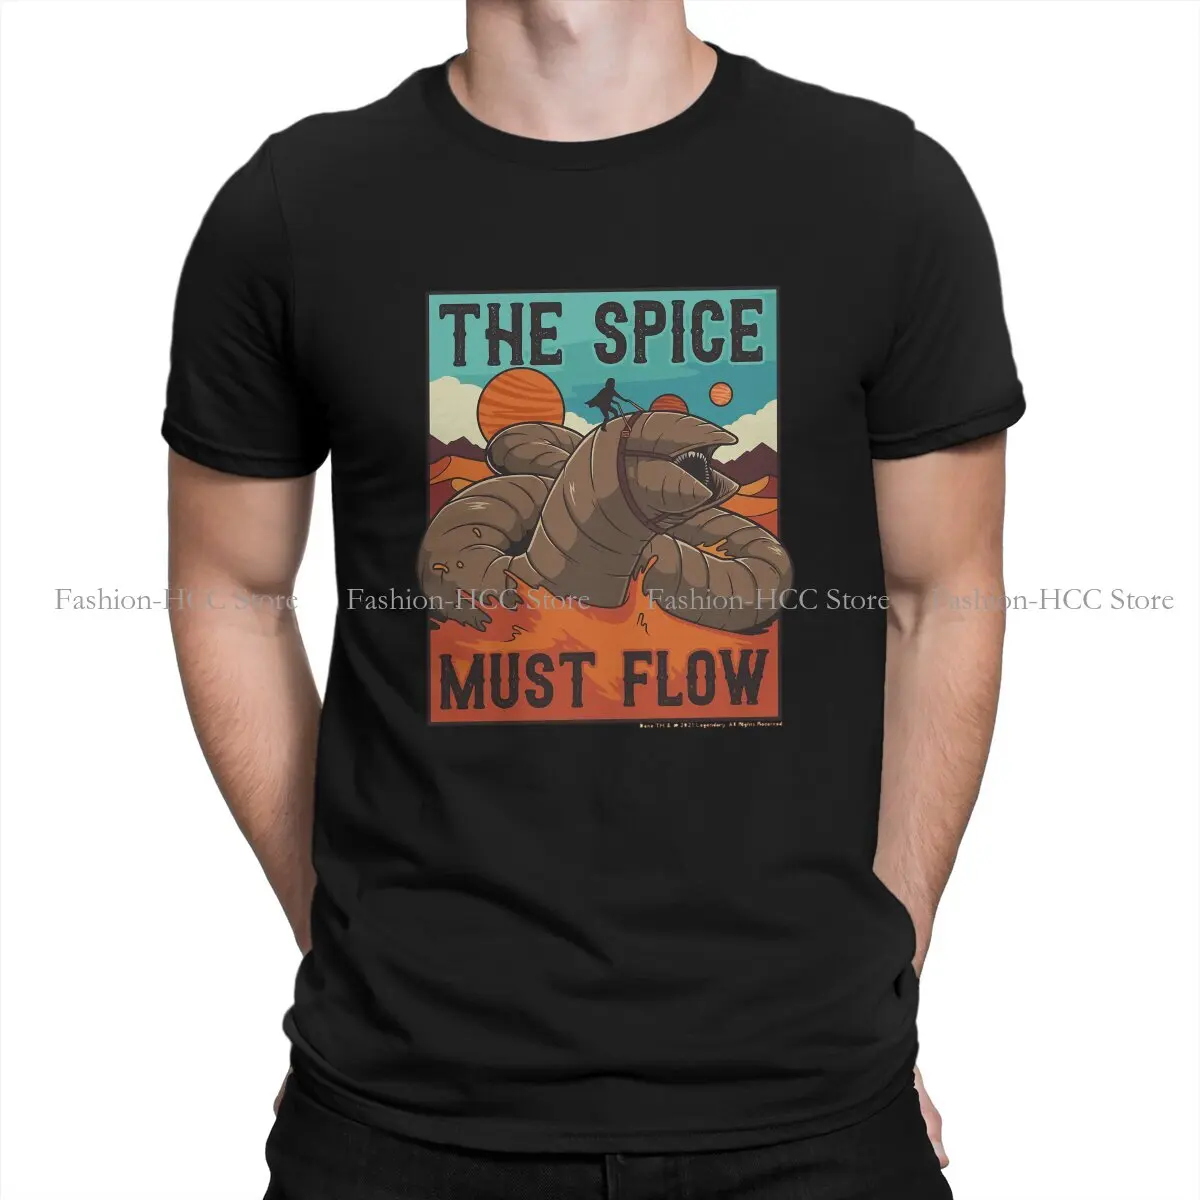 

Dune Frank Herbert Crewneck Original TShirts The Spice Must Flow cool Personalize Men's T Shirt Polyester Hipster Tops